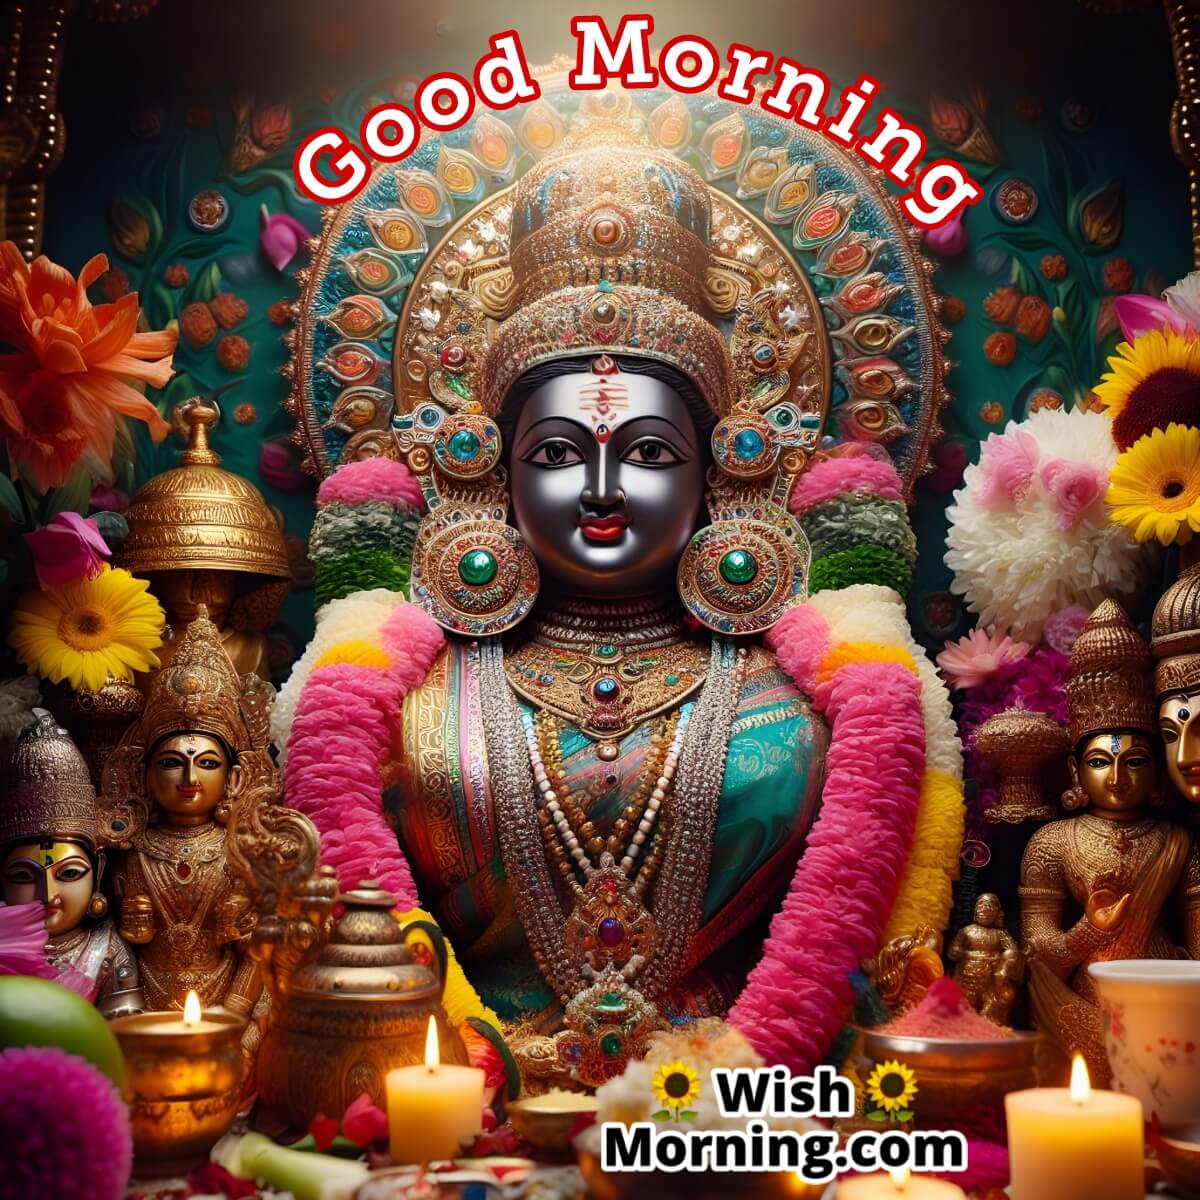 Good Morning With Meenakshi Amman's Blessings